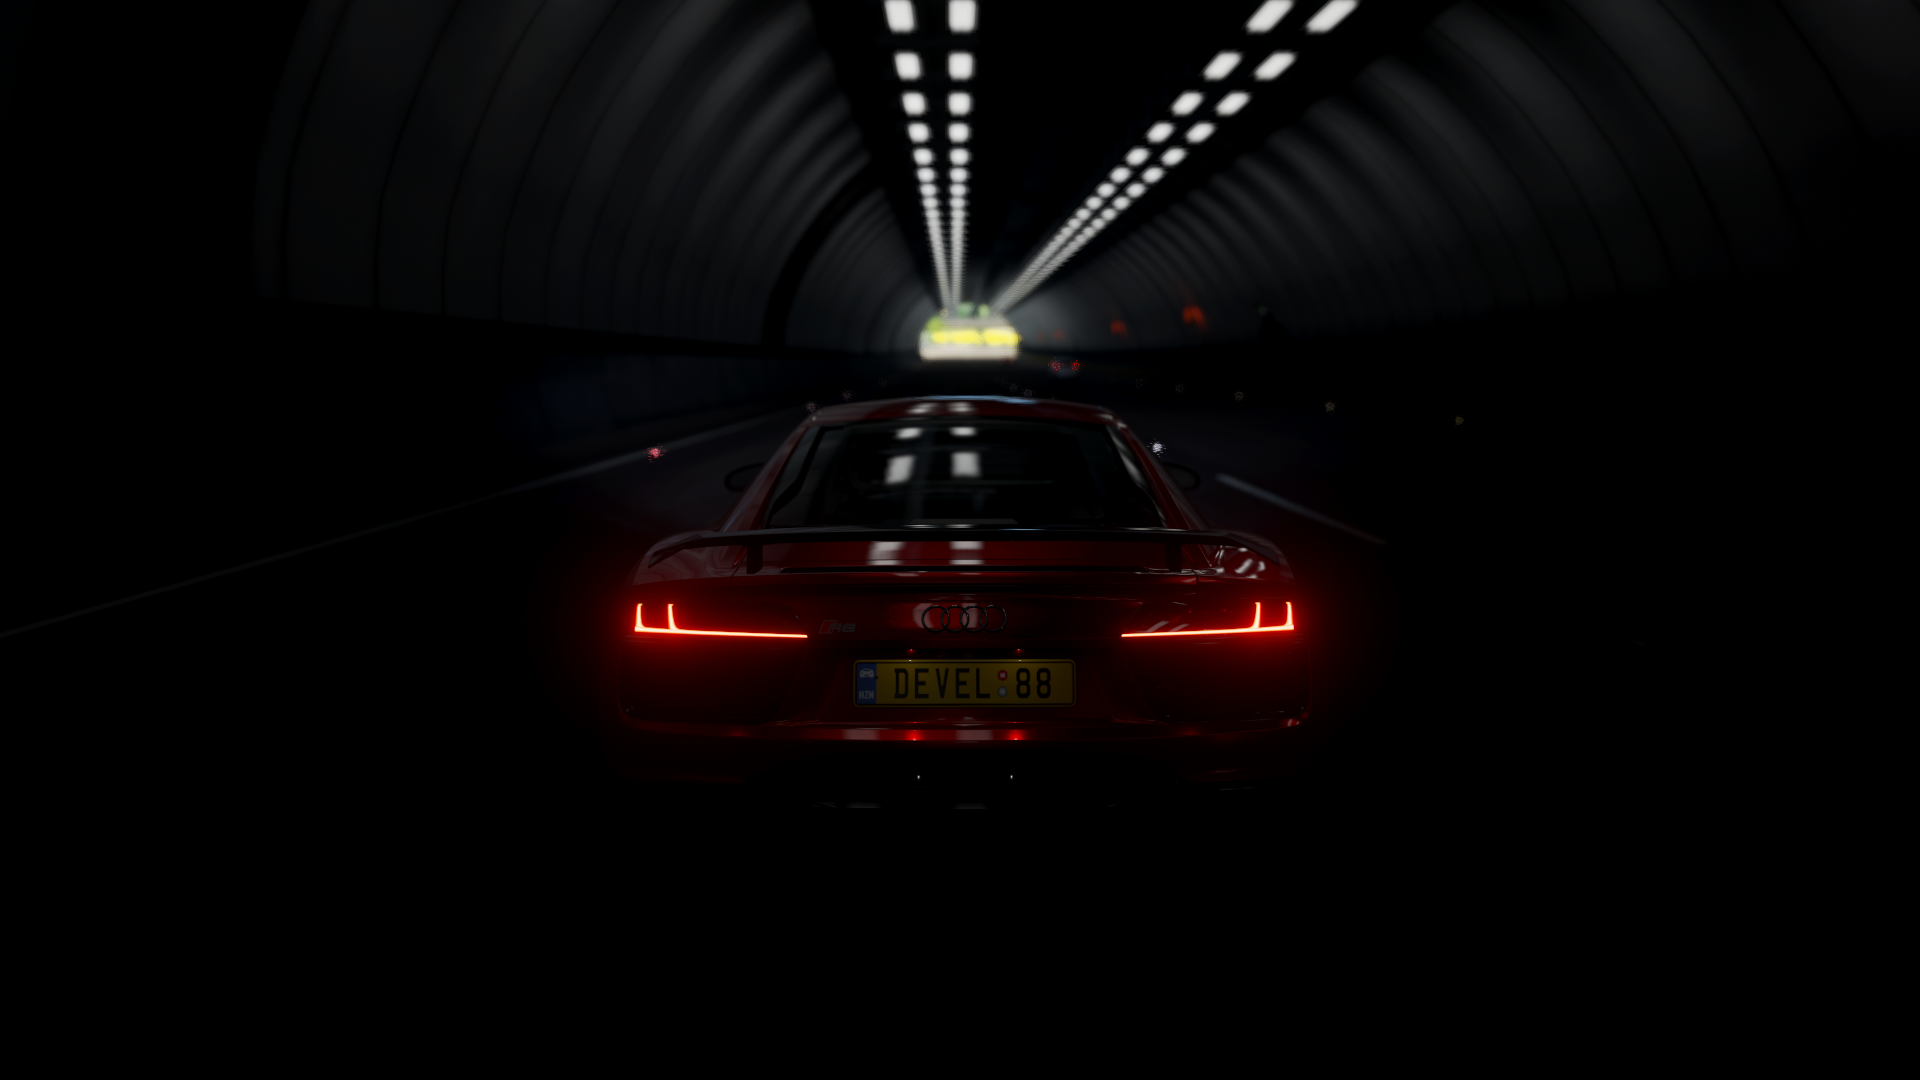 General 1920x1080 Forza Horizon 4 Audi Audi R8 dark car video games screen shot rear view tunnel taillights red cars vehicle